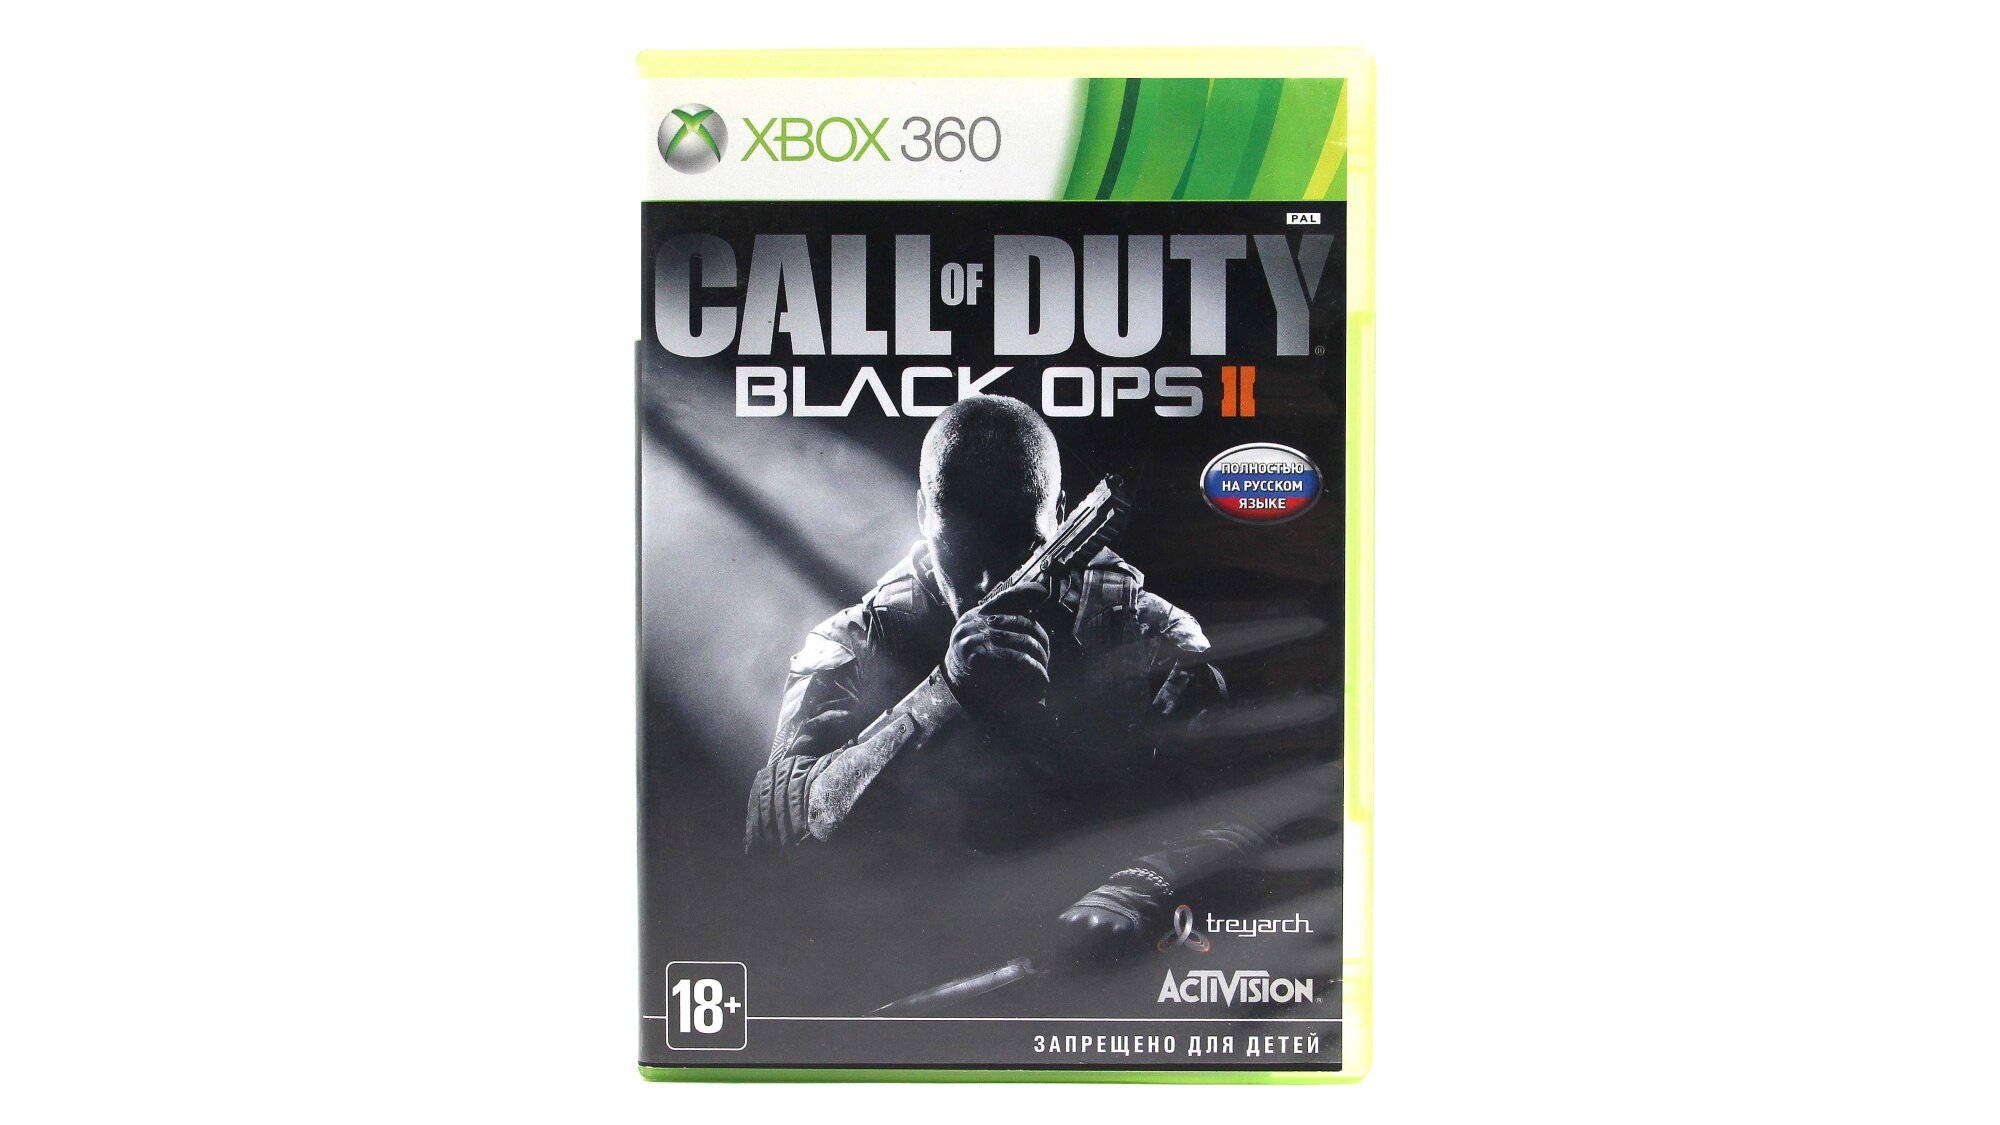 Call of Duty Black Ops II (Xbox 360, Русский язык)